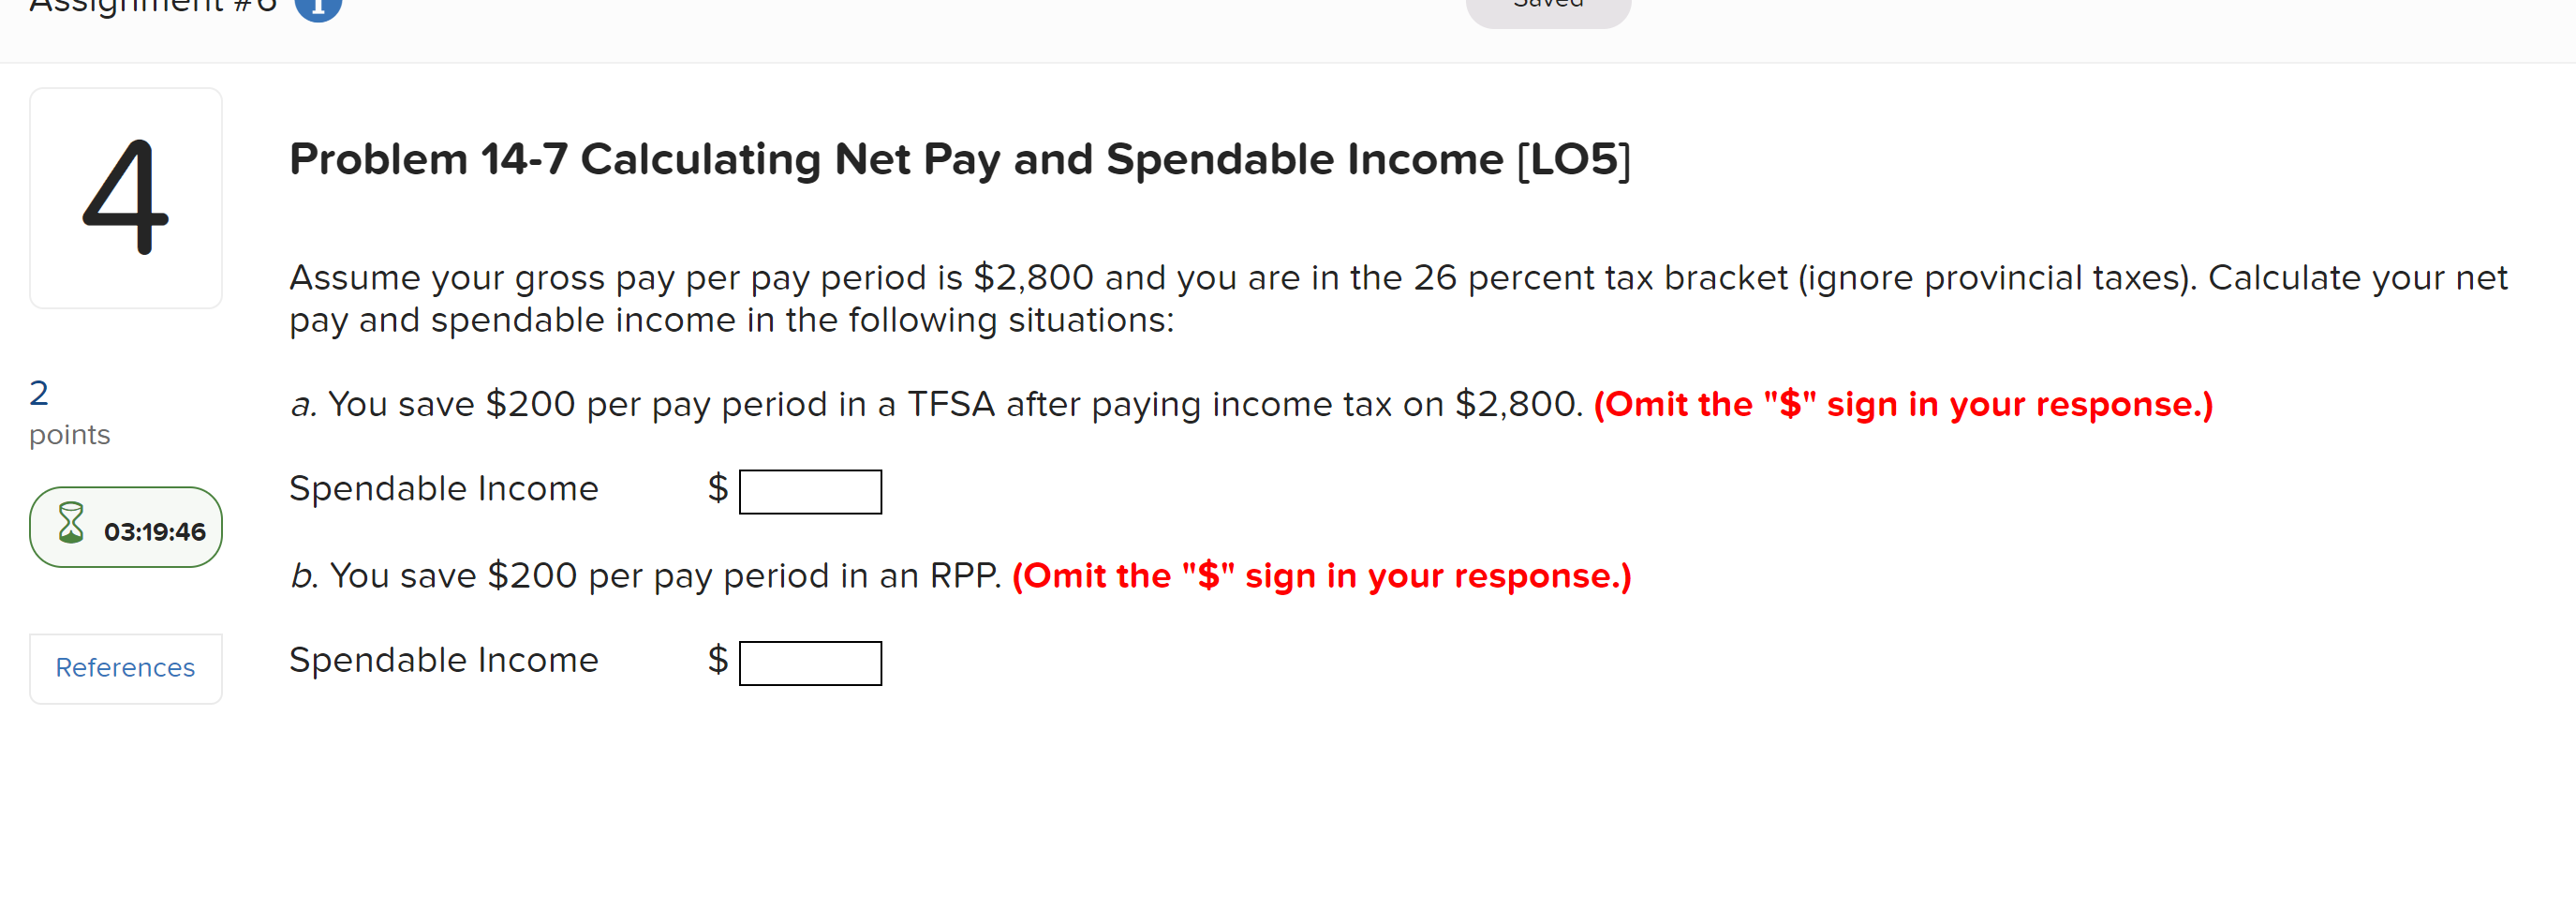 Problem 14 7 Calculating Net Pay And Spendable Income LO5 4 Assume Your Gross Pay Per Pay 